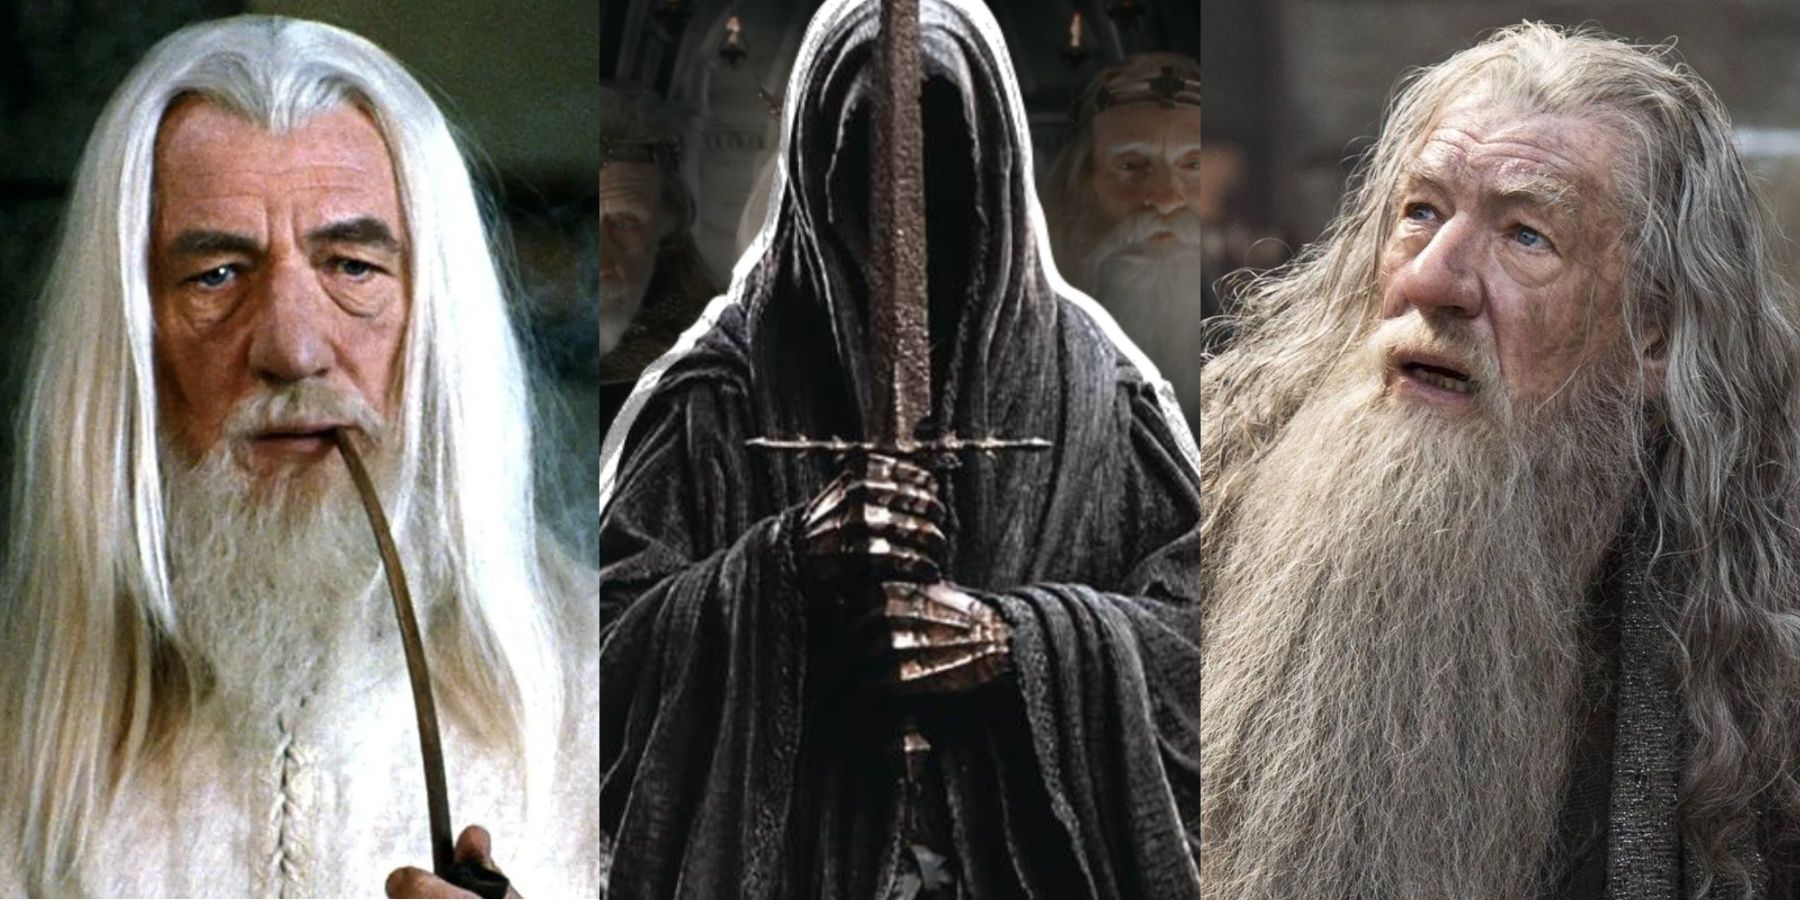 Gandalf the White, a Nazgûl, and Gandalf the Gray